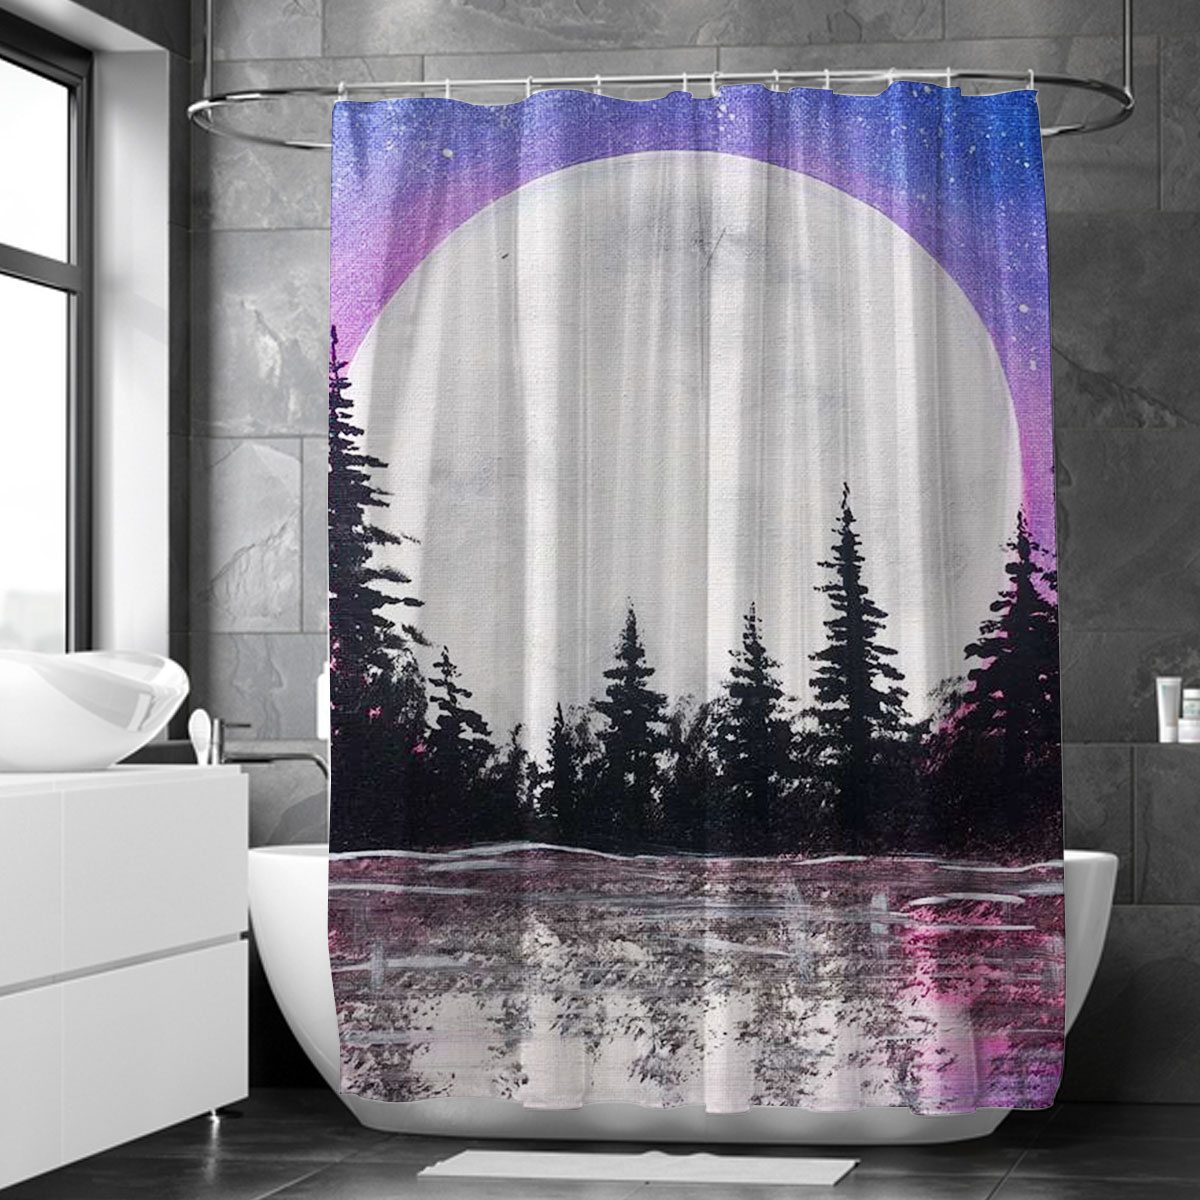 Abstract Moon River Shower Curtain